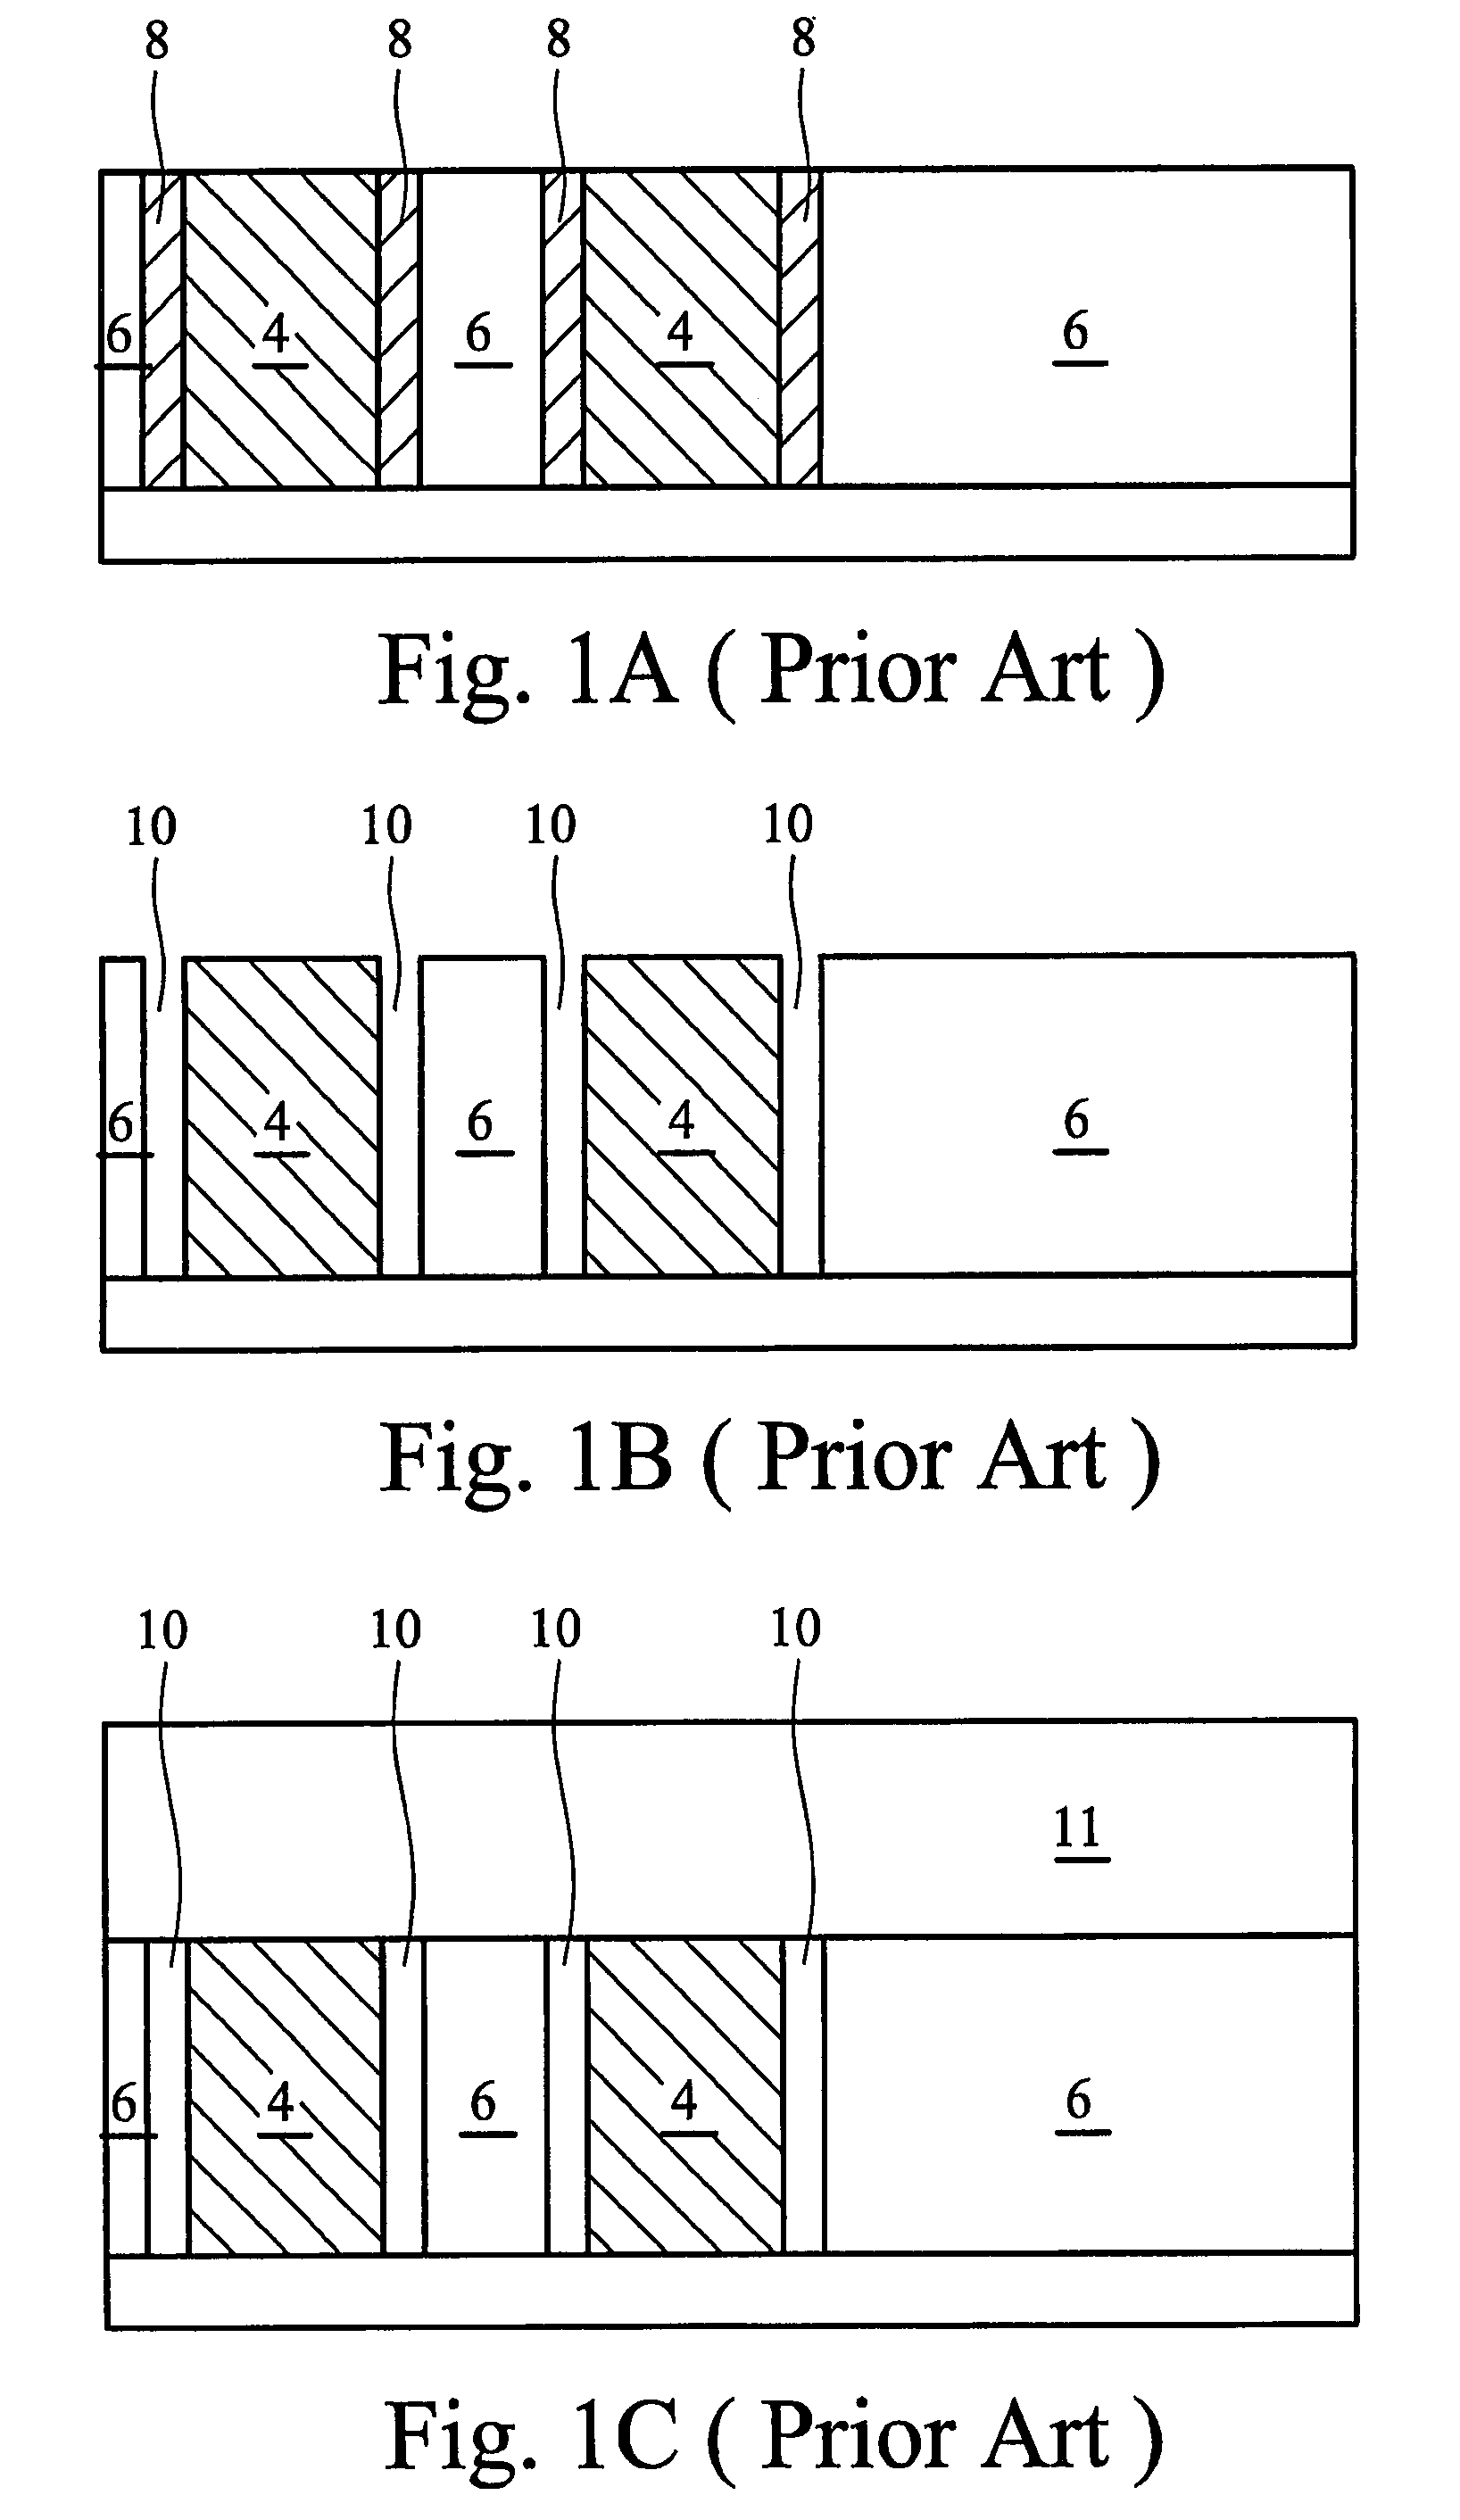 Self-aligned air-gap in interconnect structures